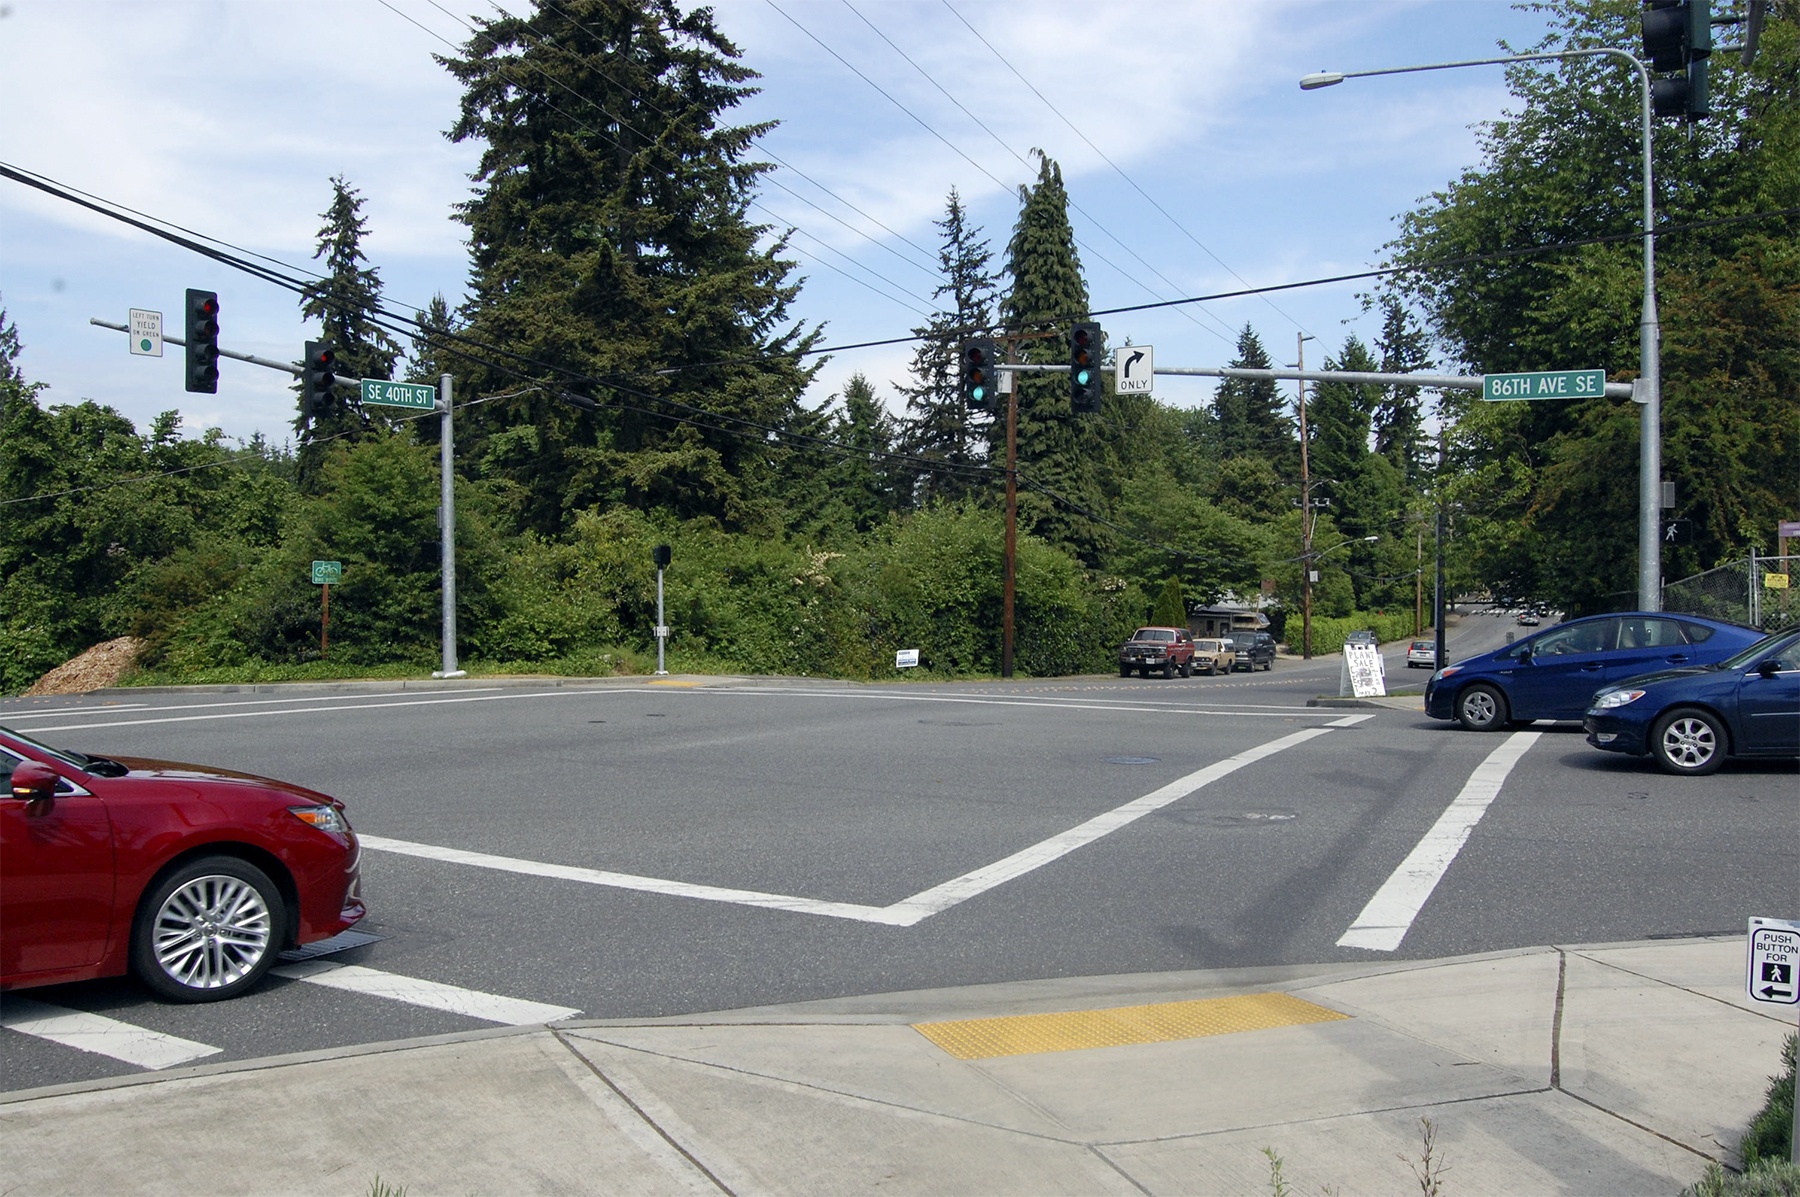 The Mercer Island City Council decided to add a westbound left turn lane at the intersection of Southeast 40th Street at the 86th Avenue Southeast